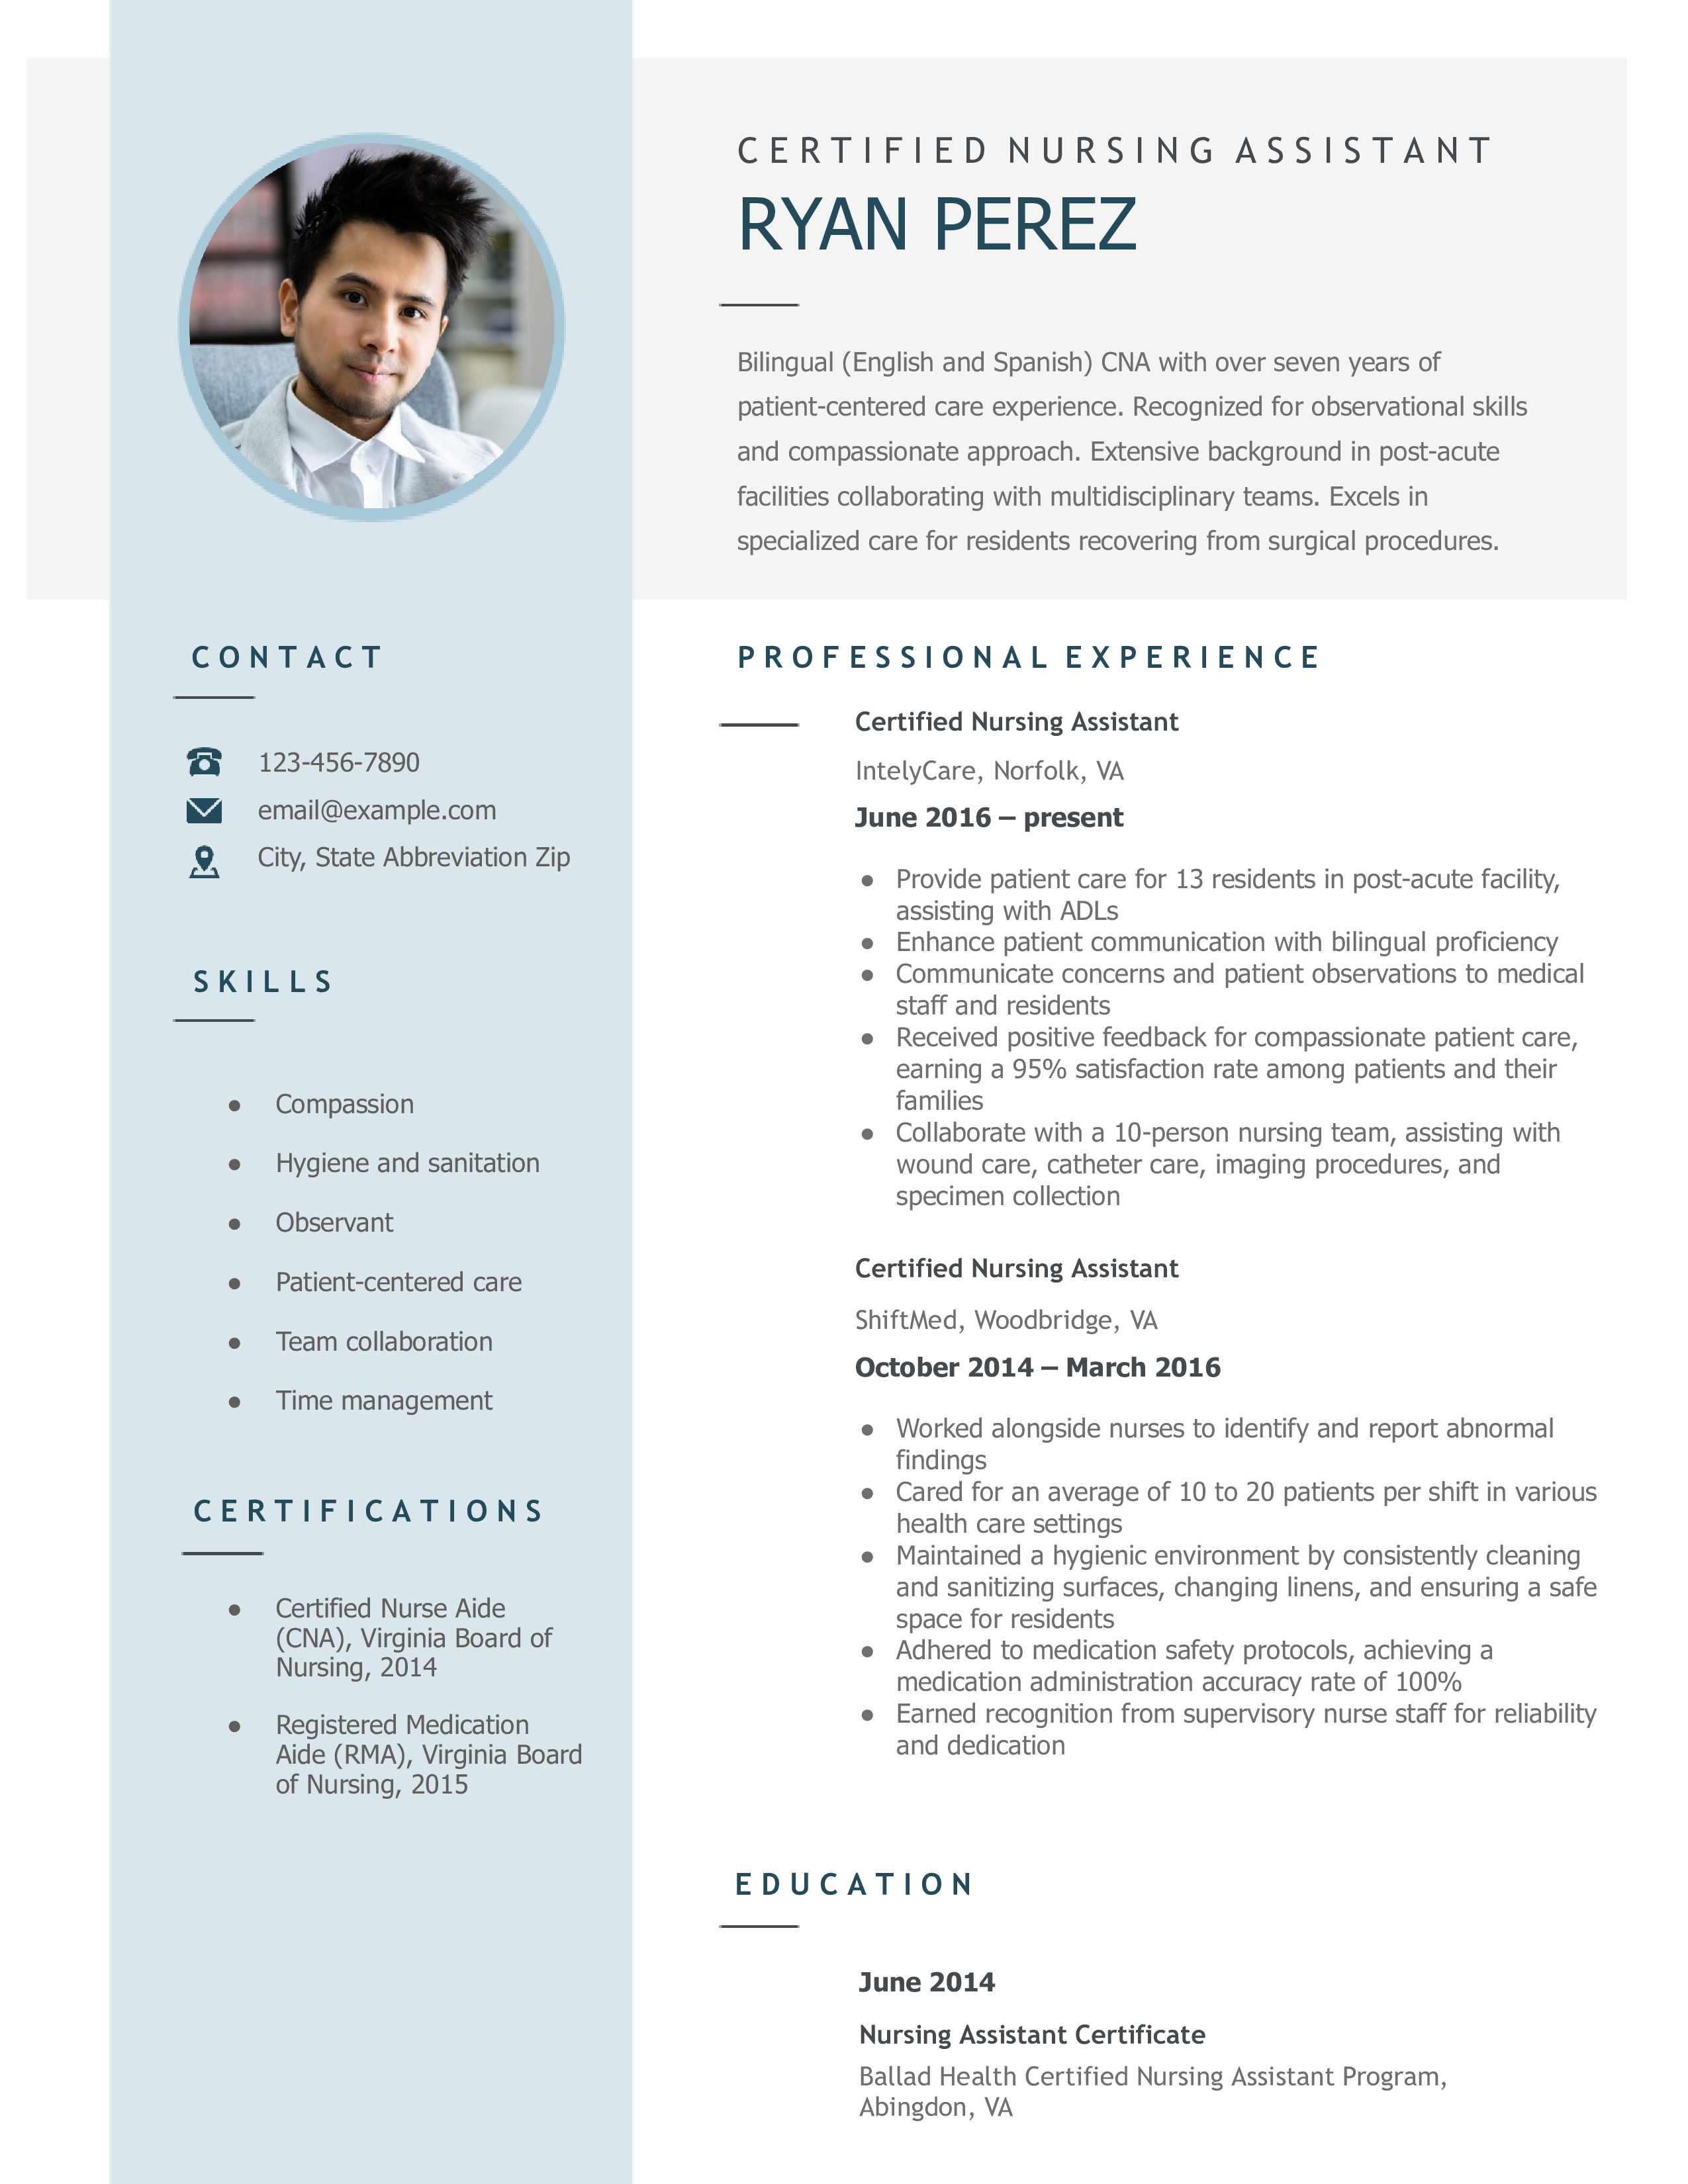 Certified Nursing Assistant Resume Templates and Examples for [y]